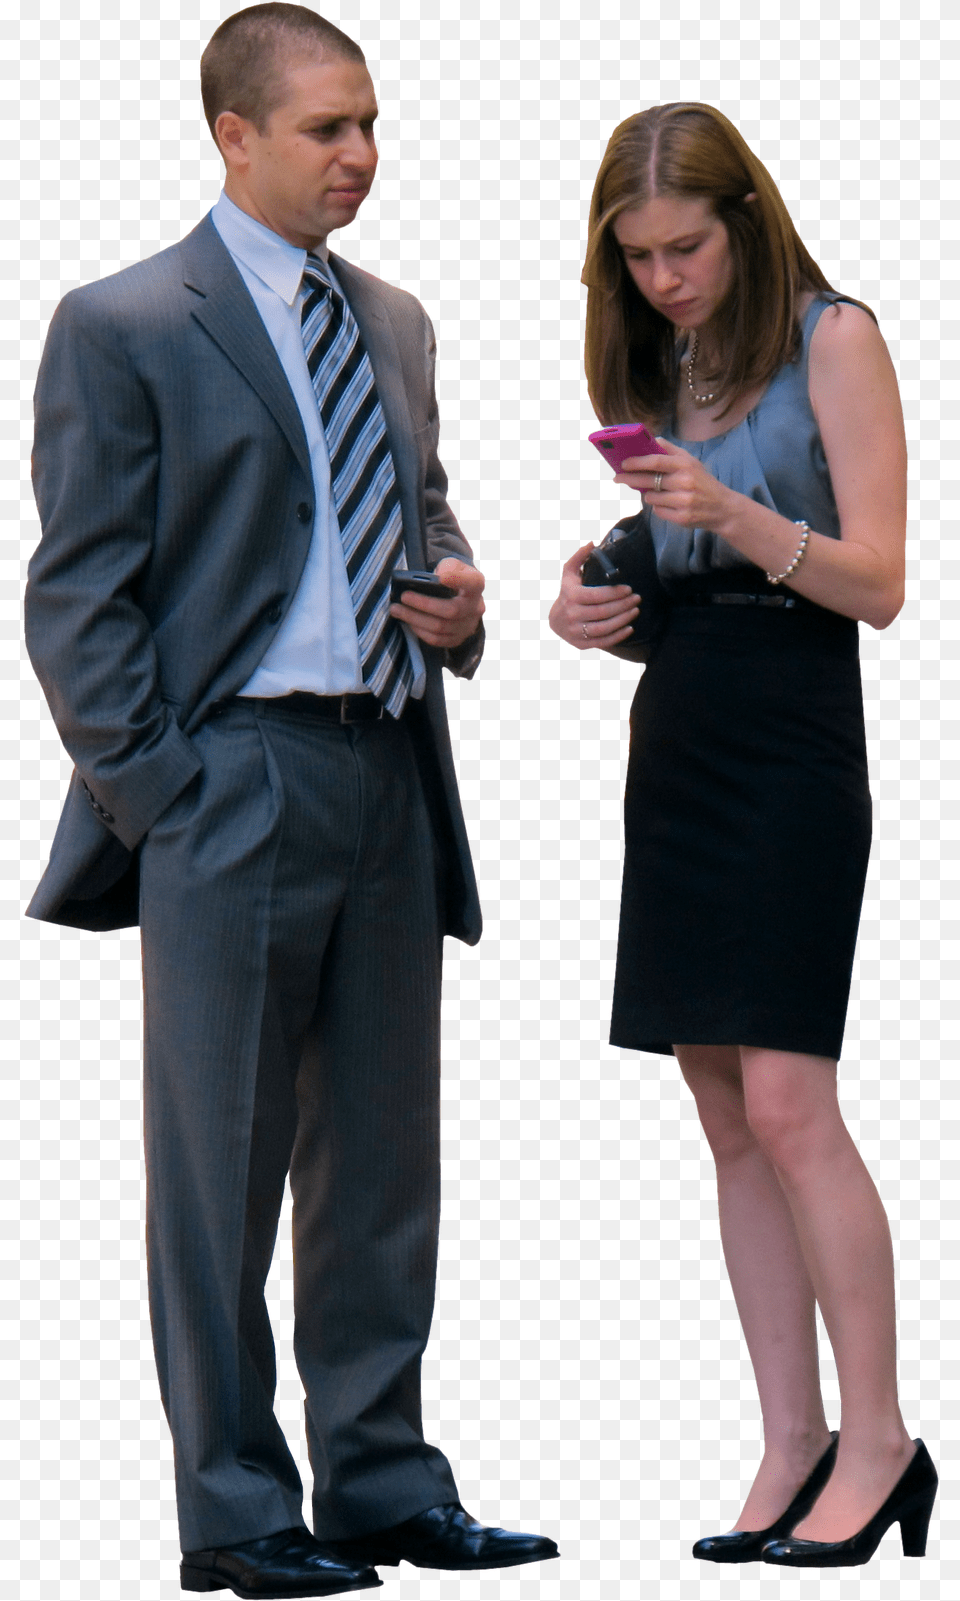 Cutouts And Transparent Background Of Different People People Walking Silhouette, Accessories, Tie, Suit, Shoe Free Png